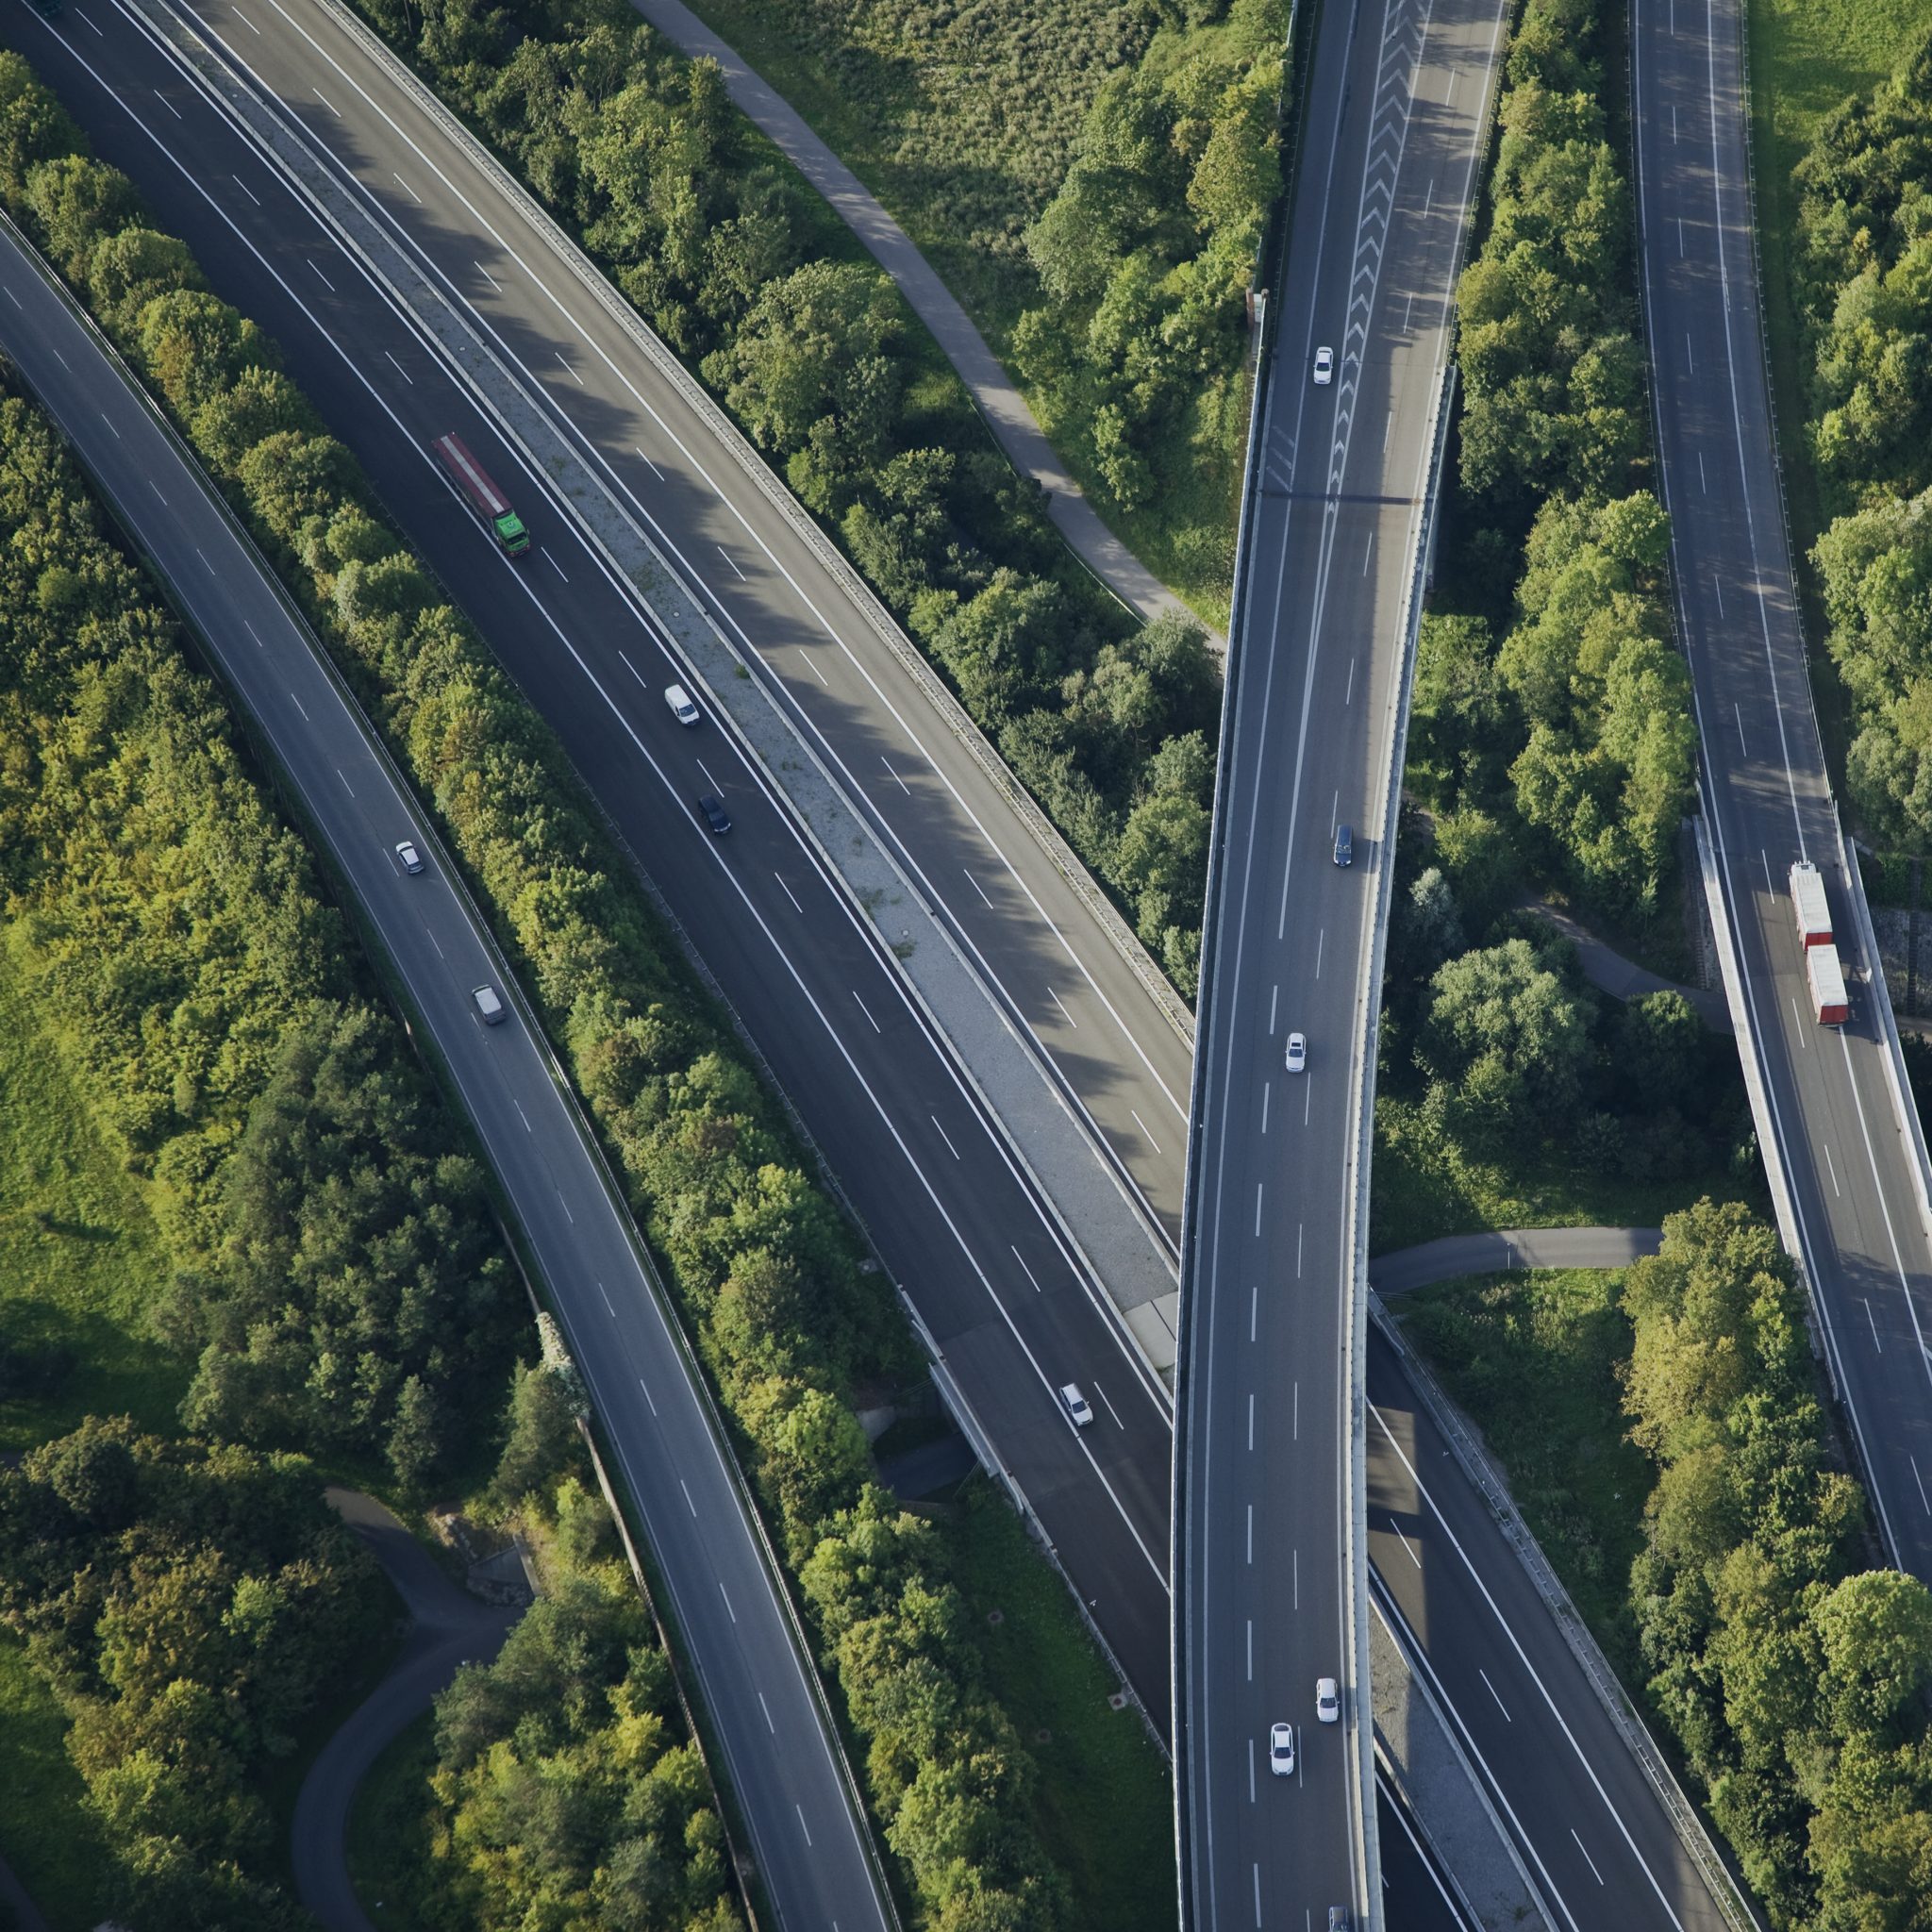 An aerial view of a highway interchange with lush greenery surrounding the roads.